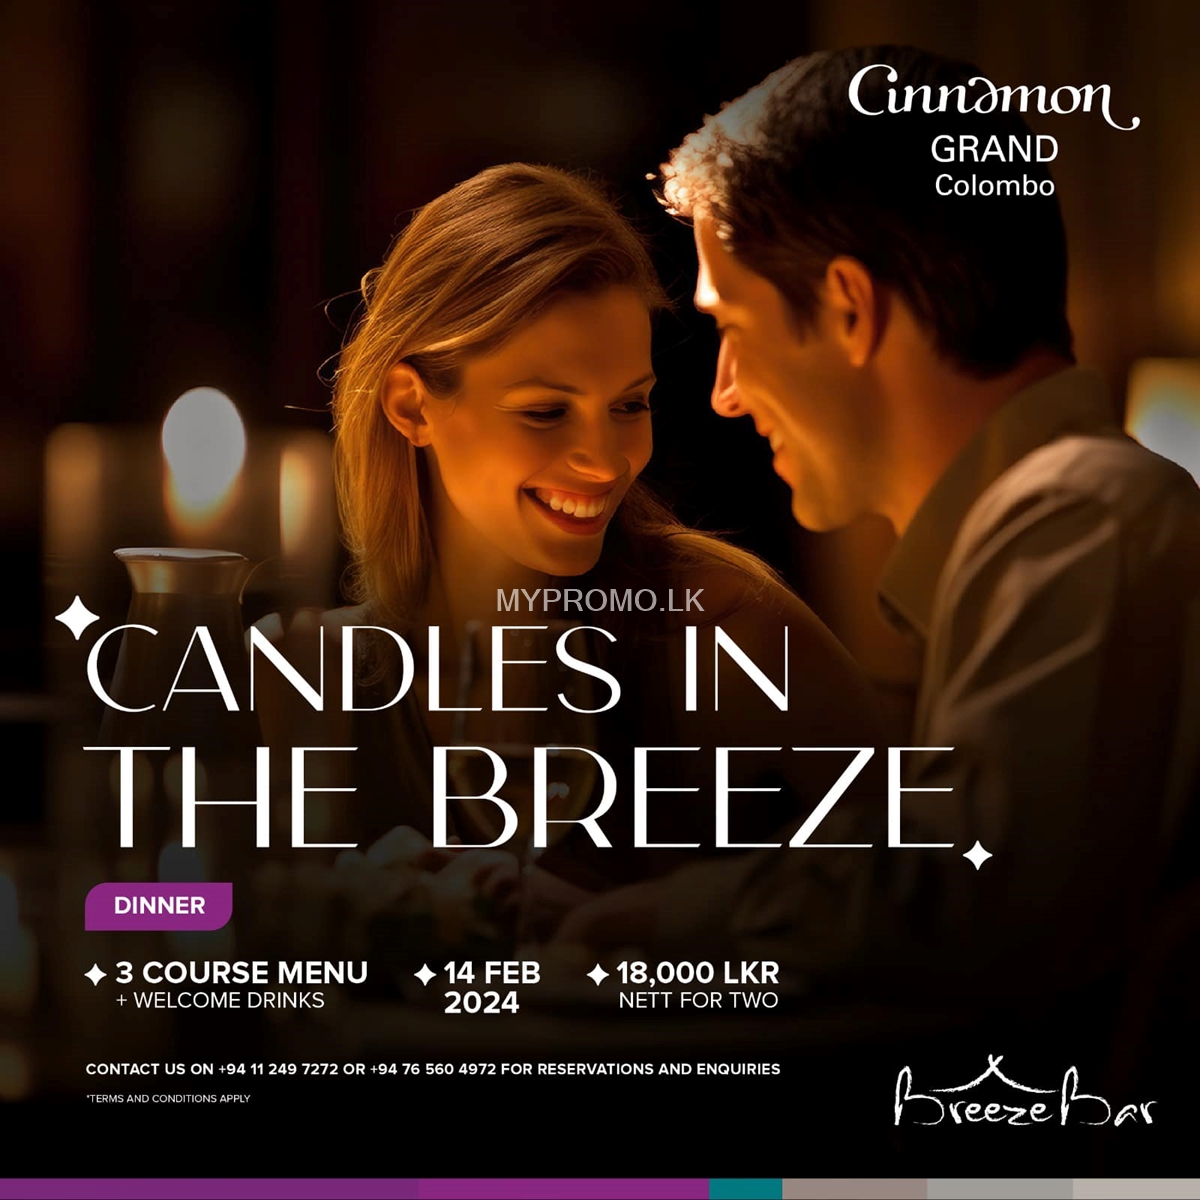 Candles in the Breeze at Cinnamon Grand